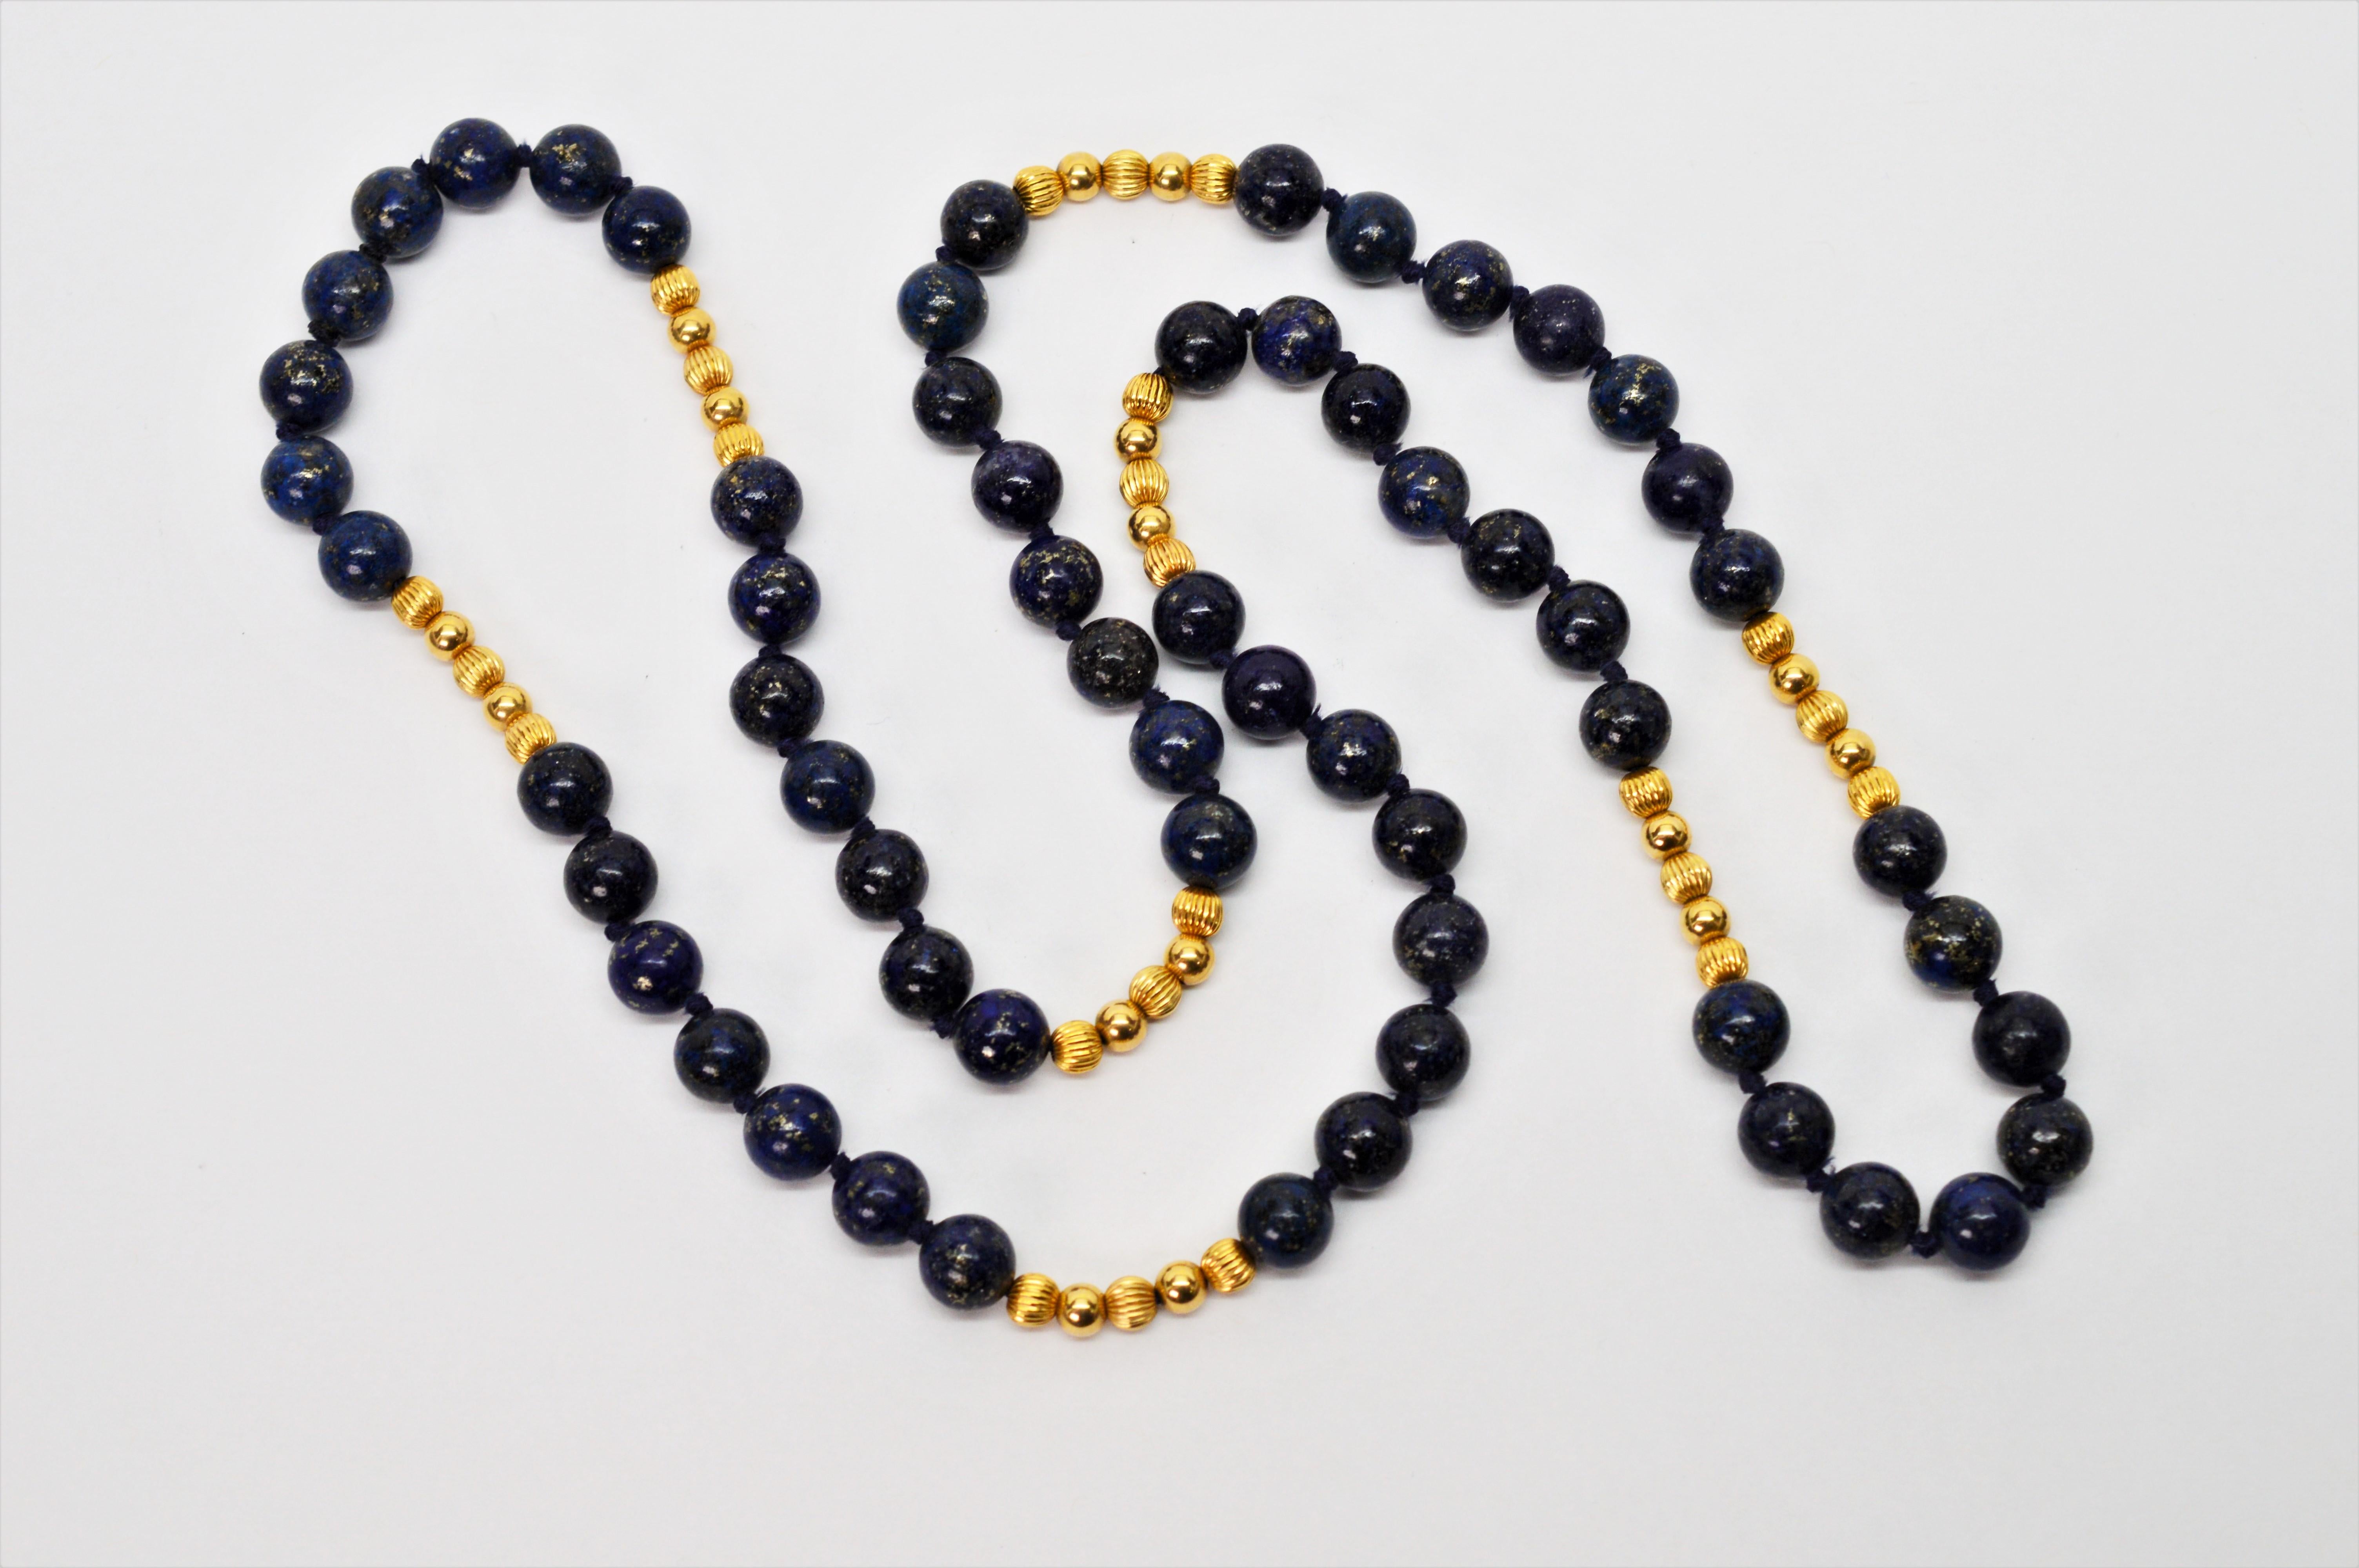 Thirty inches of beautifully marbled natural lapis beads accented with fourteen carat yellow gold beads, hand strung and knotted.
Slip over style and versatile piece perfect for dress or jeans. The strand is made of sixty round 9 mm indigo blue